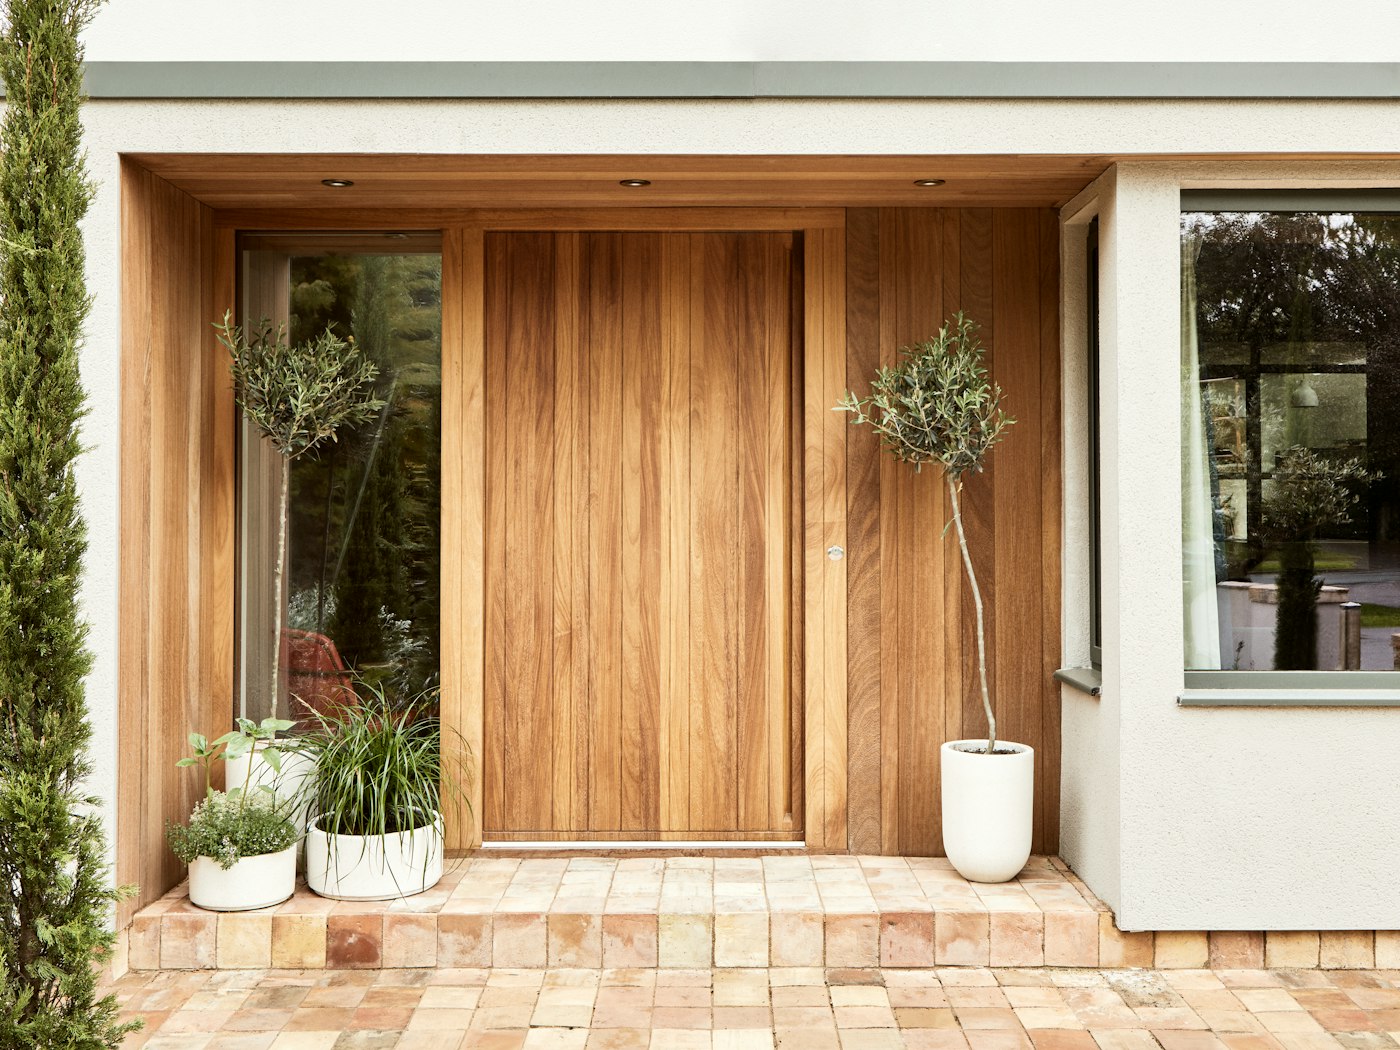 All Urban Front doors are customisable & bespoke